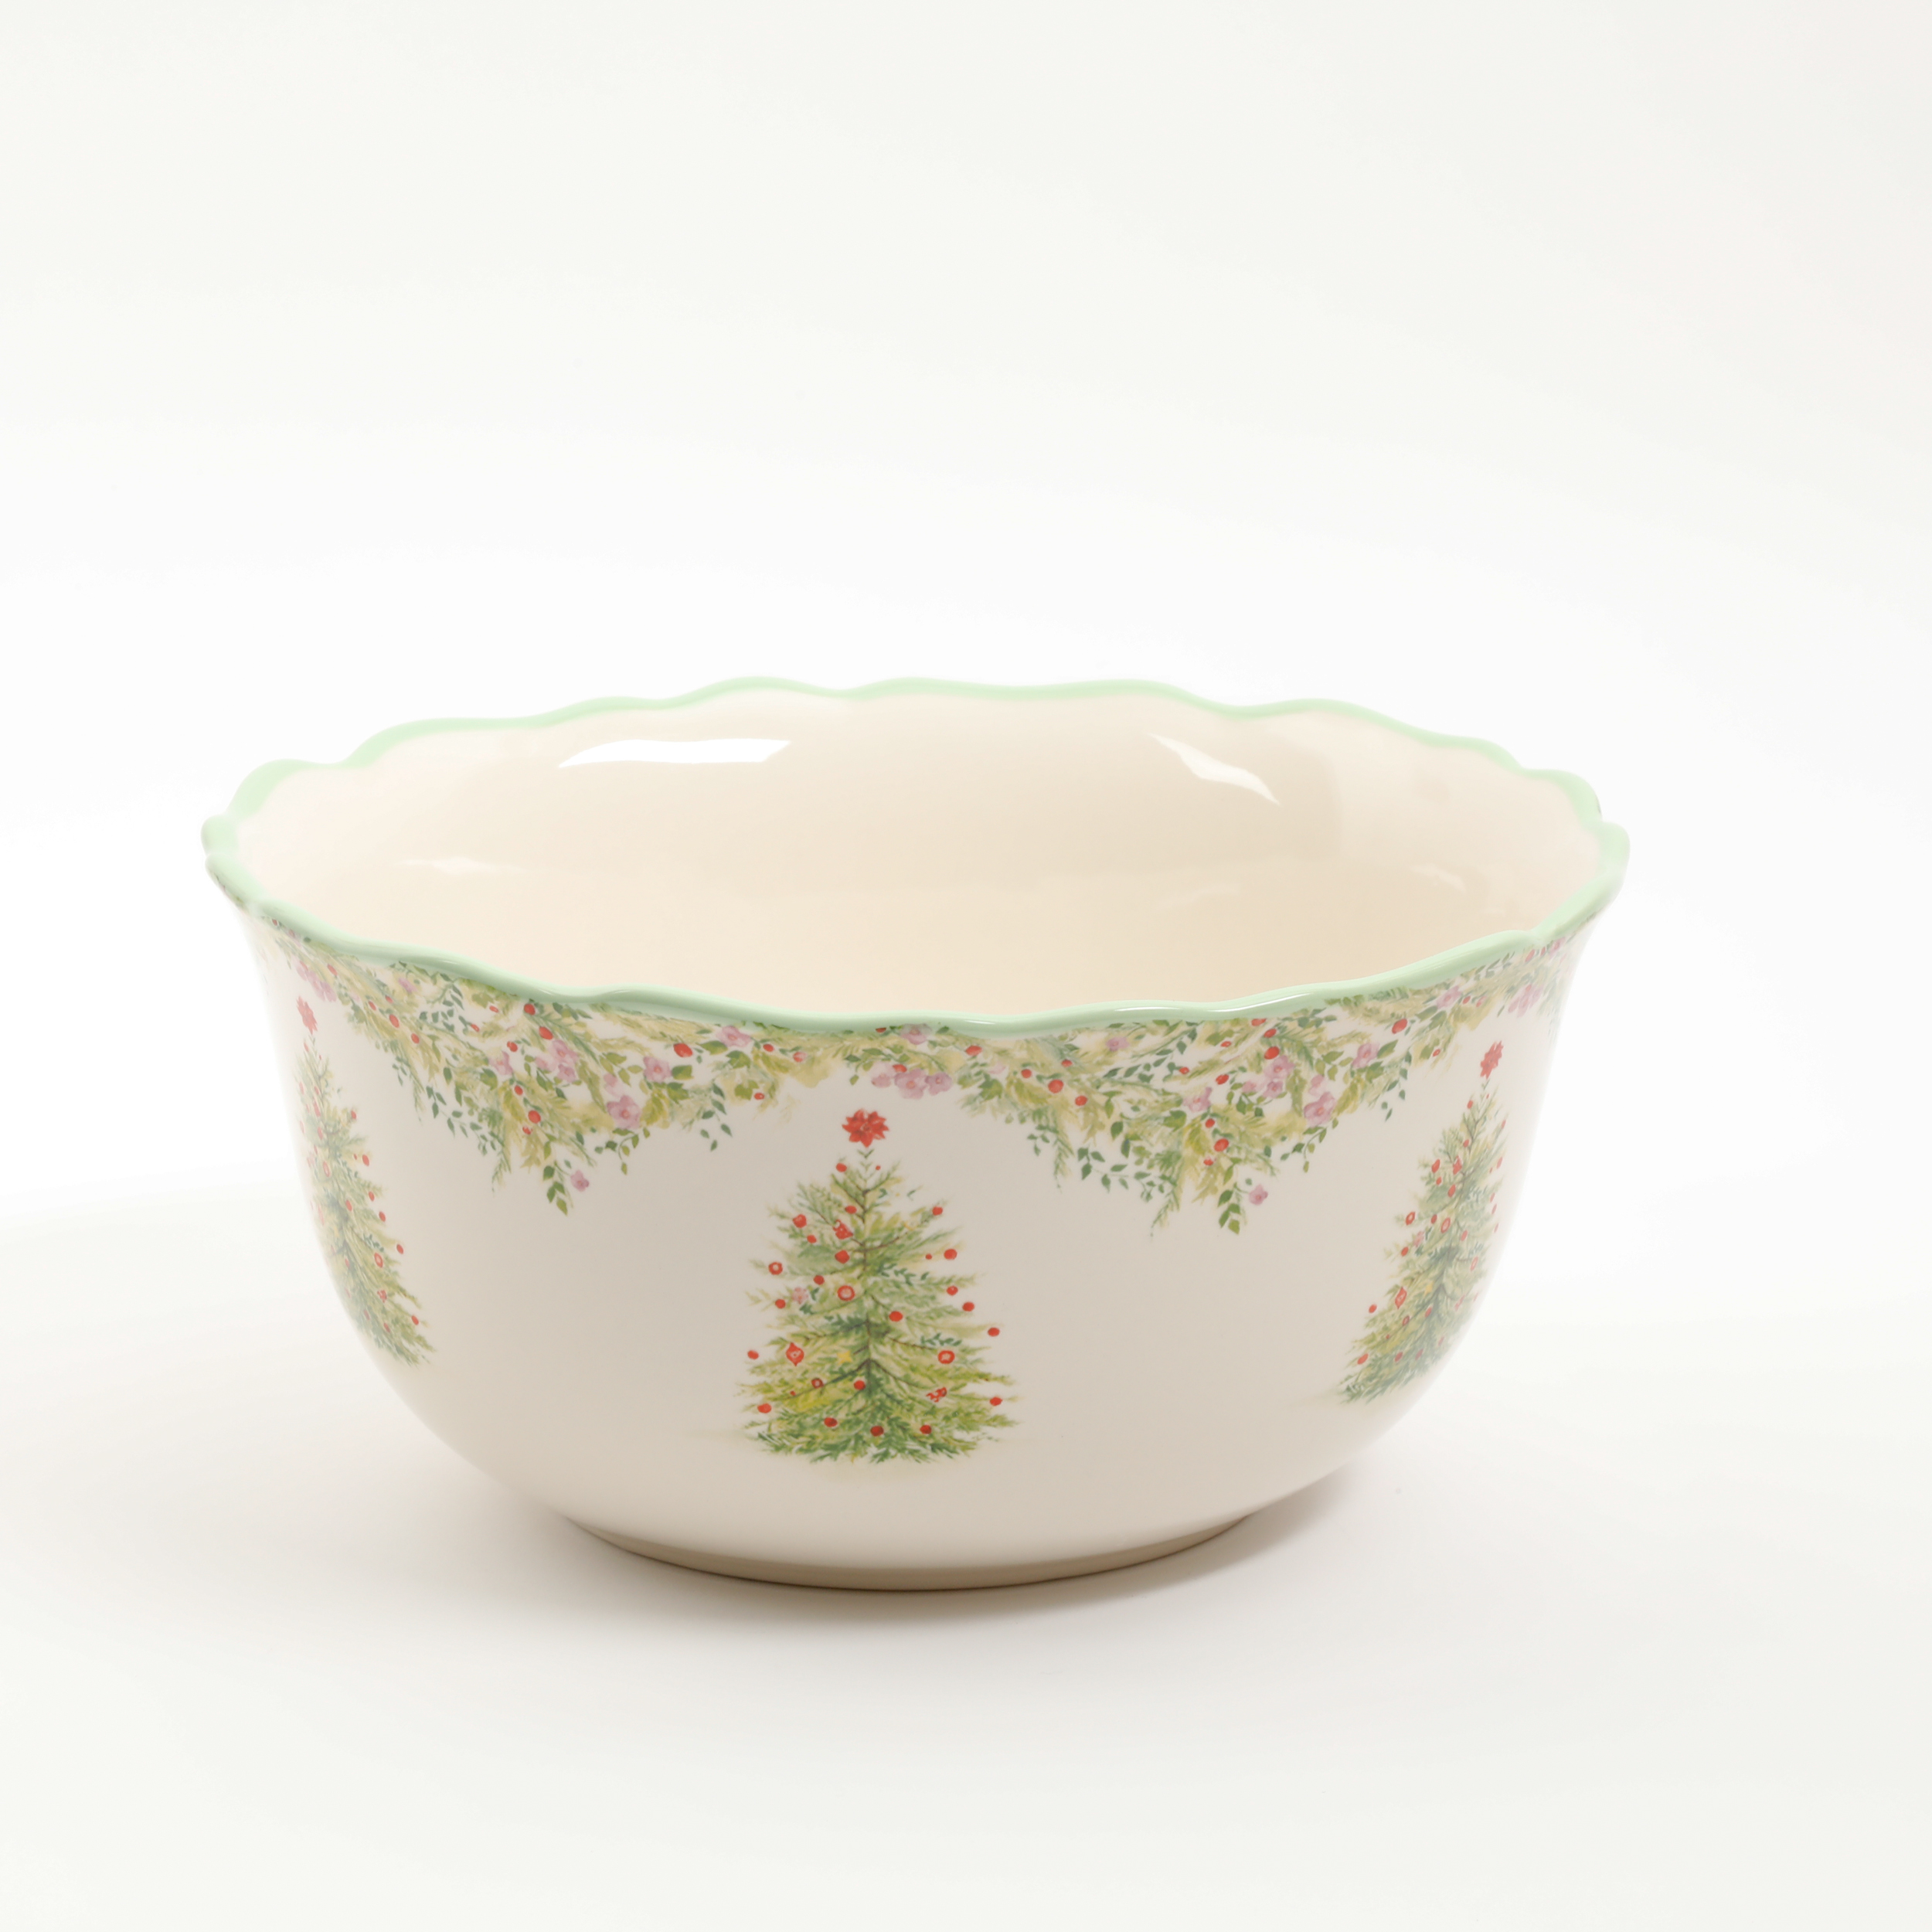 The Pioneer Woman Mint Bowl Set, 3 Piece - image 4 of 5